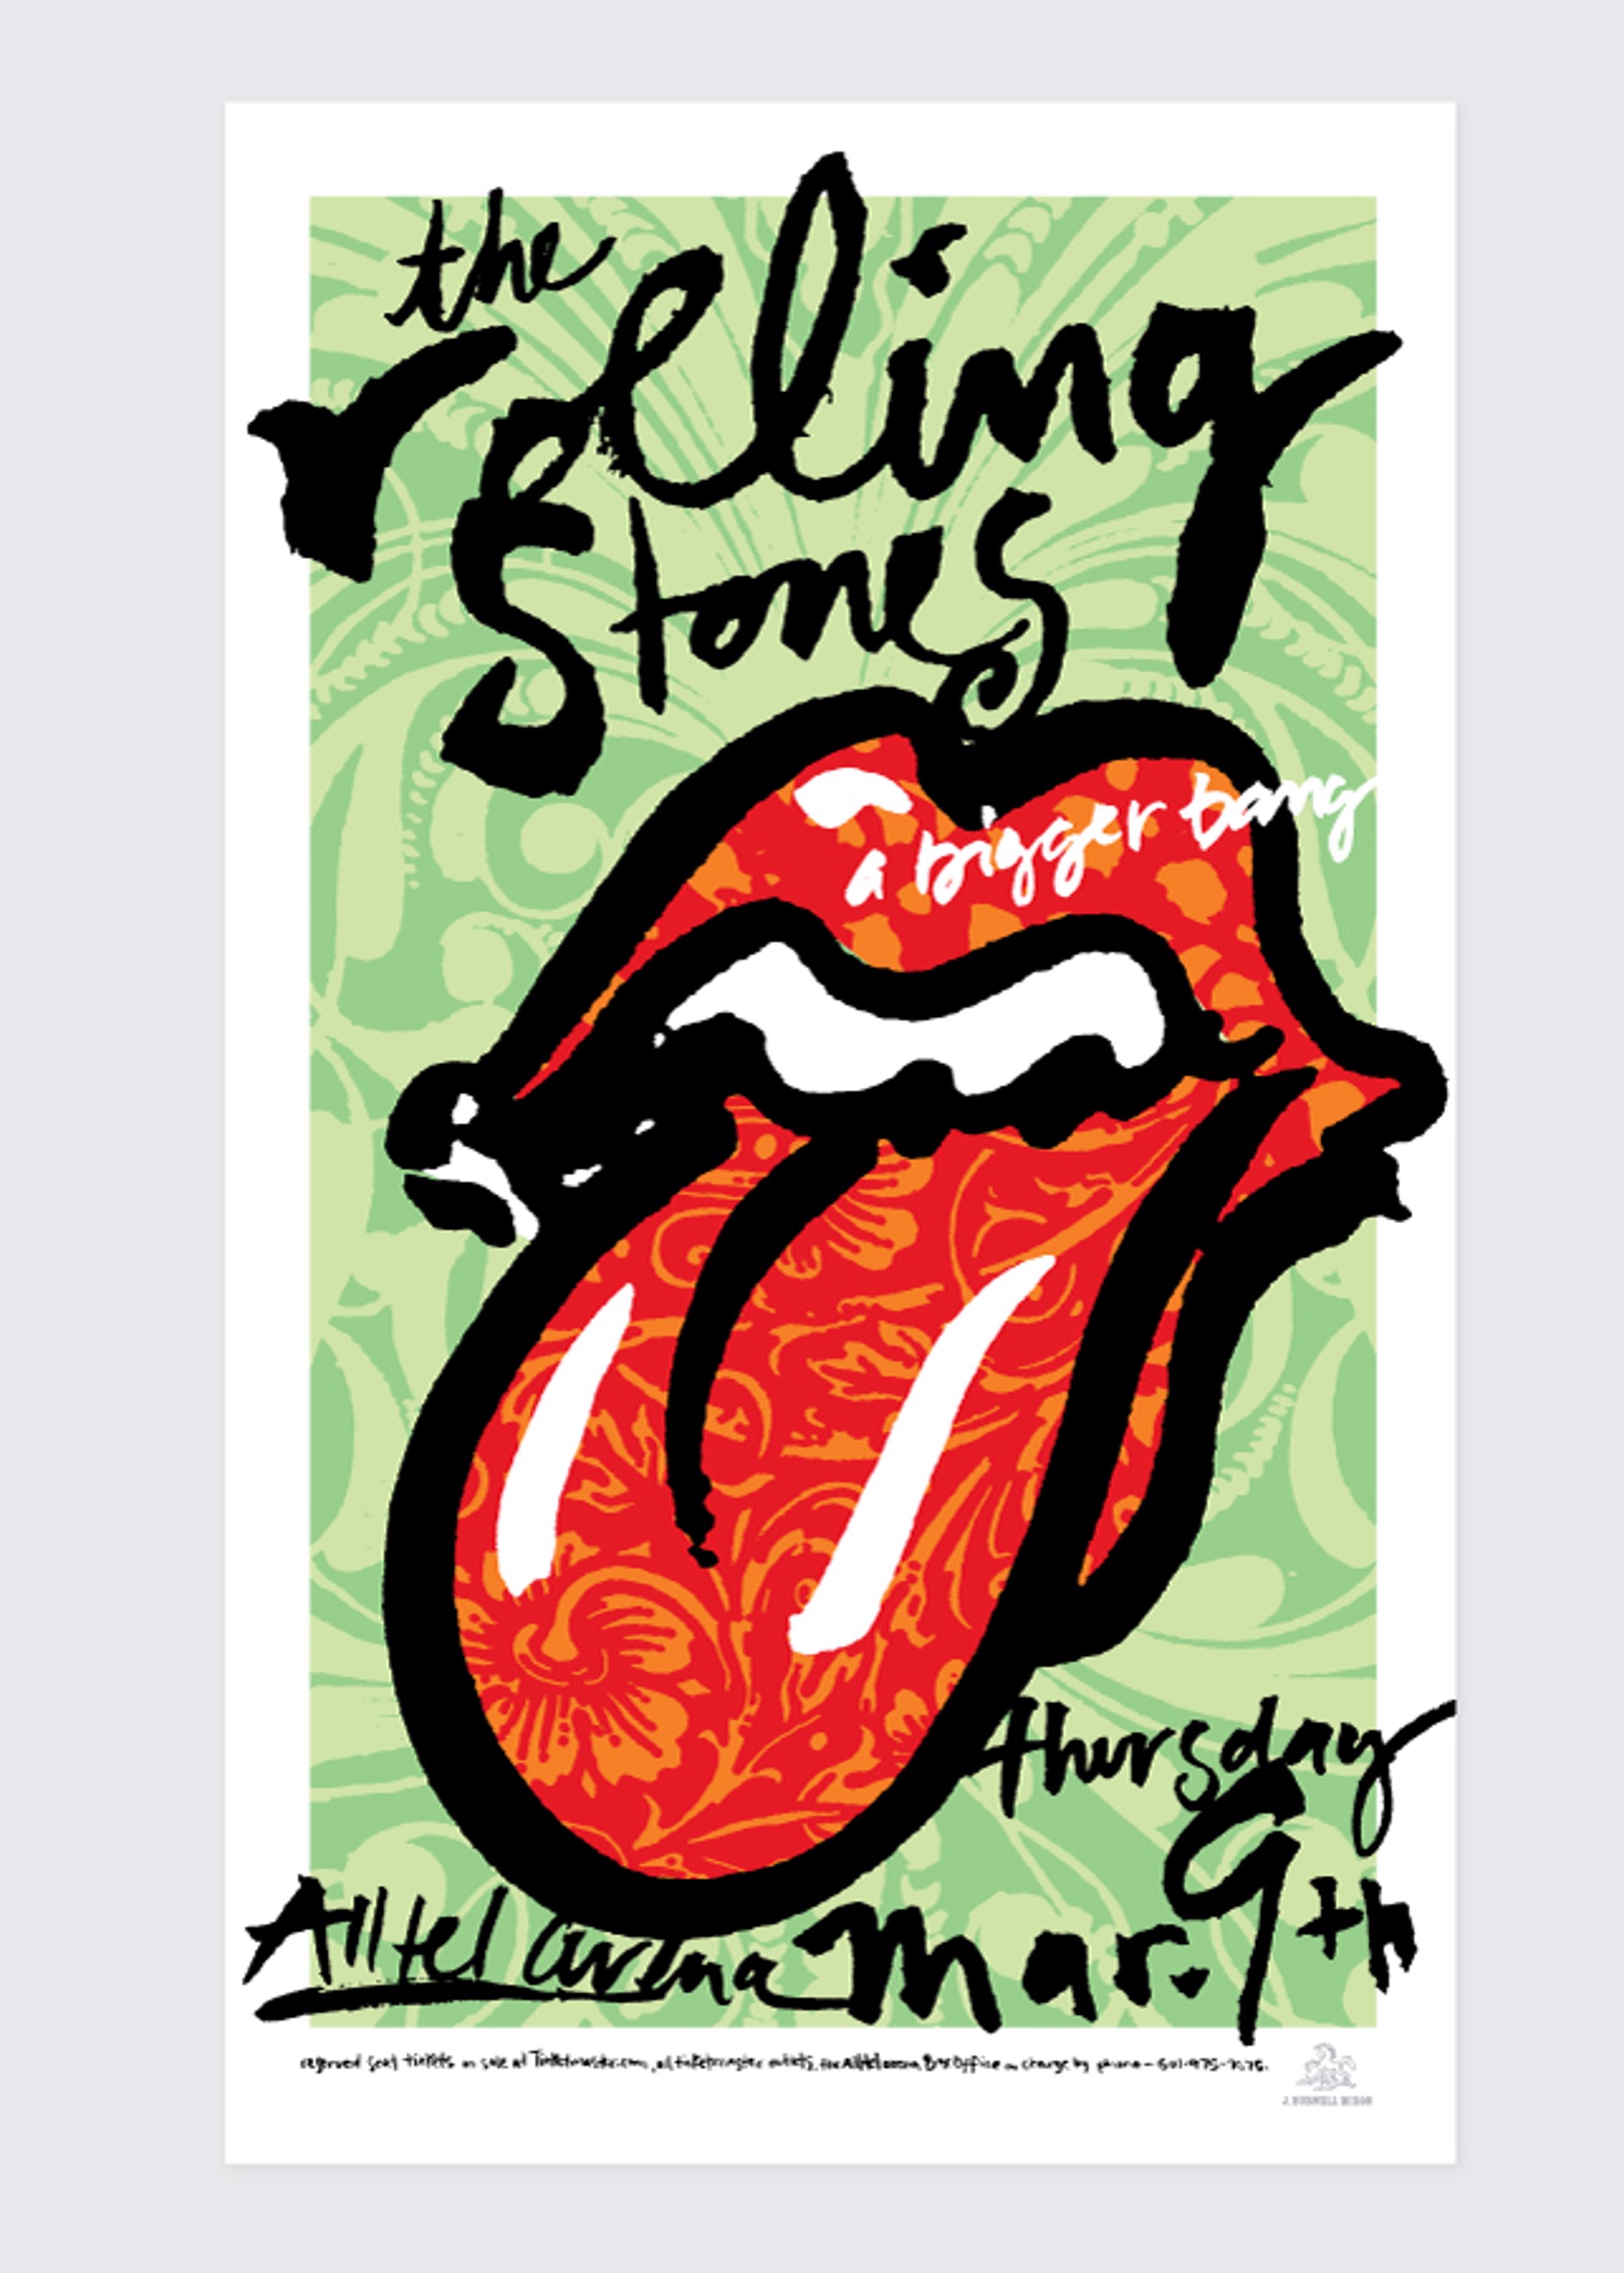 Rolling Stones Concert Poster by Jamie Burwell Mixon